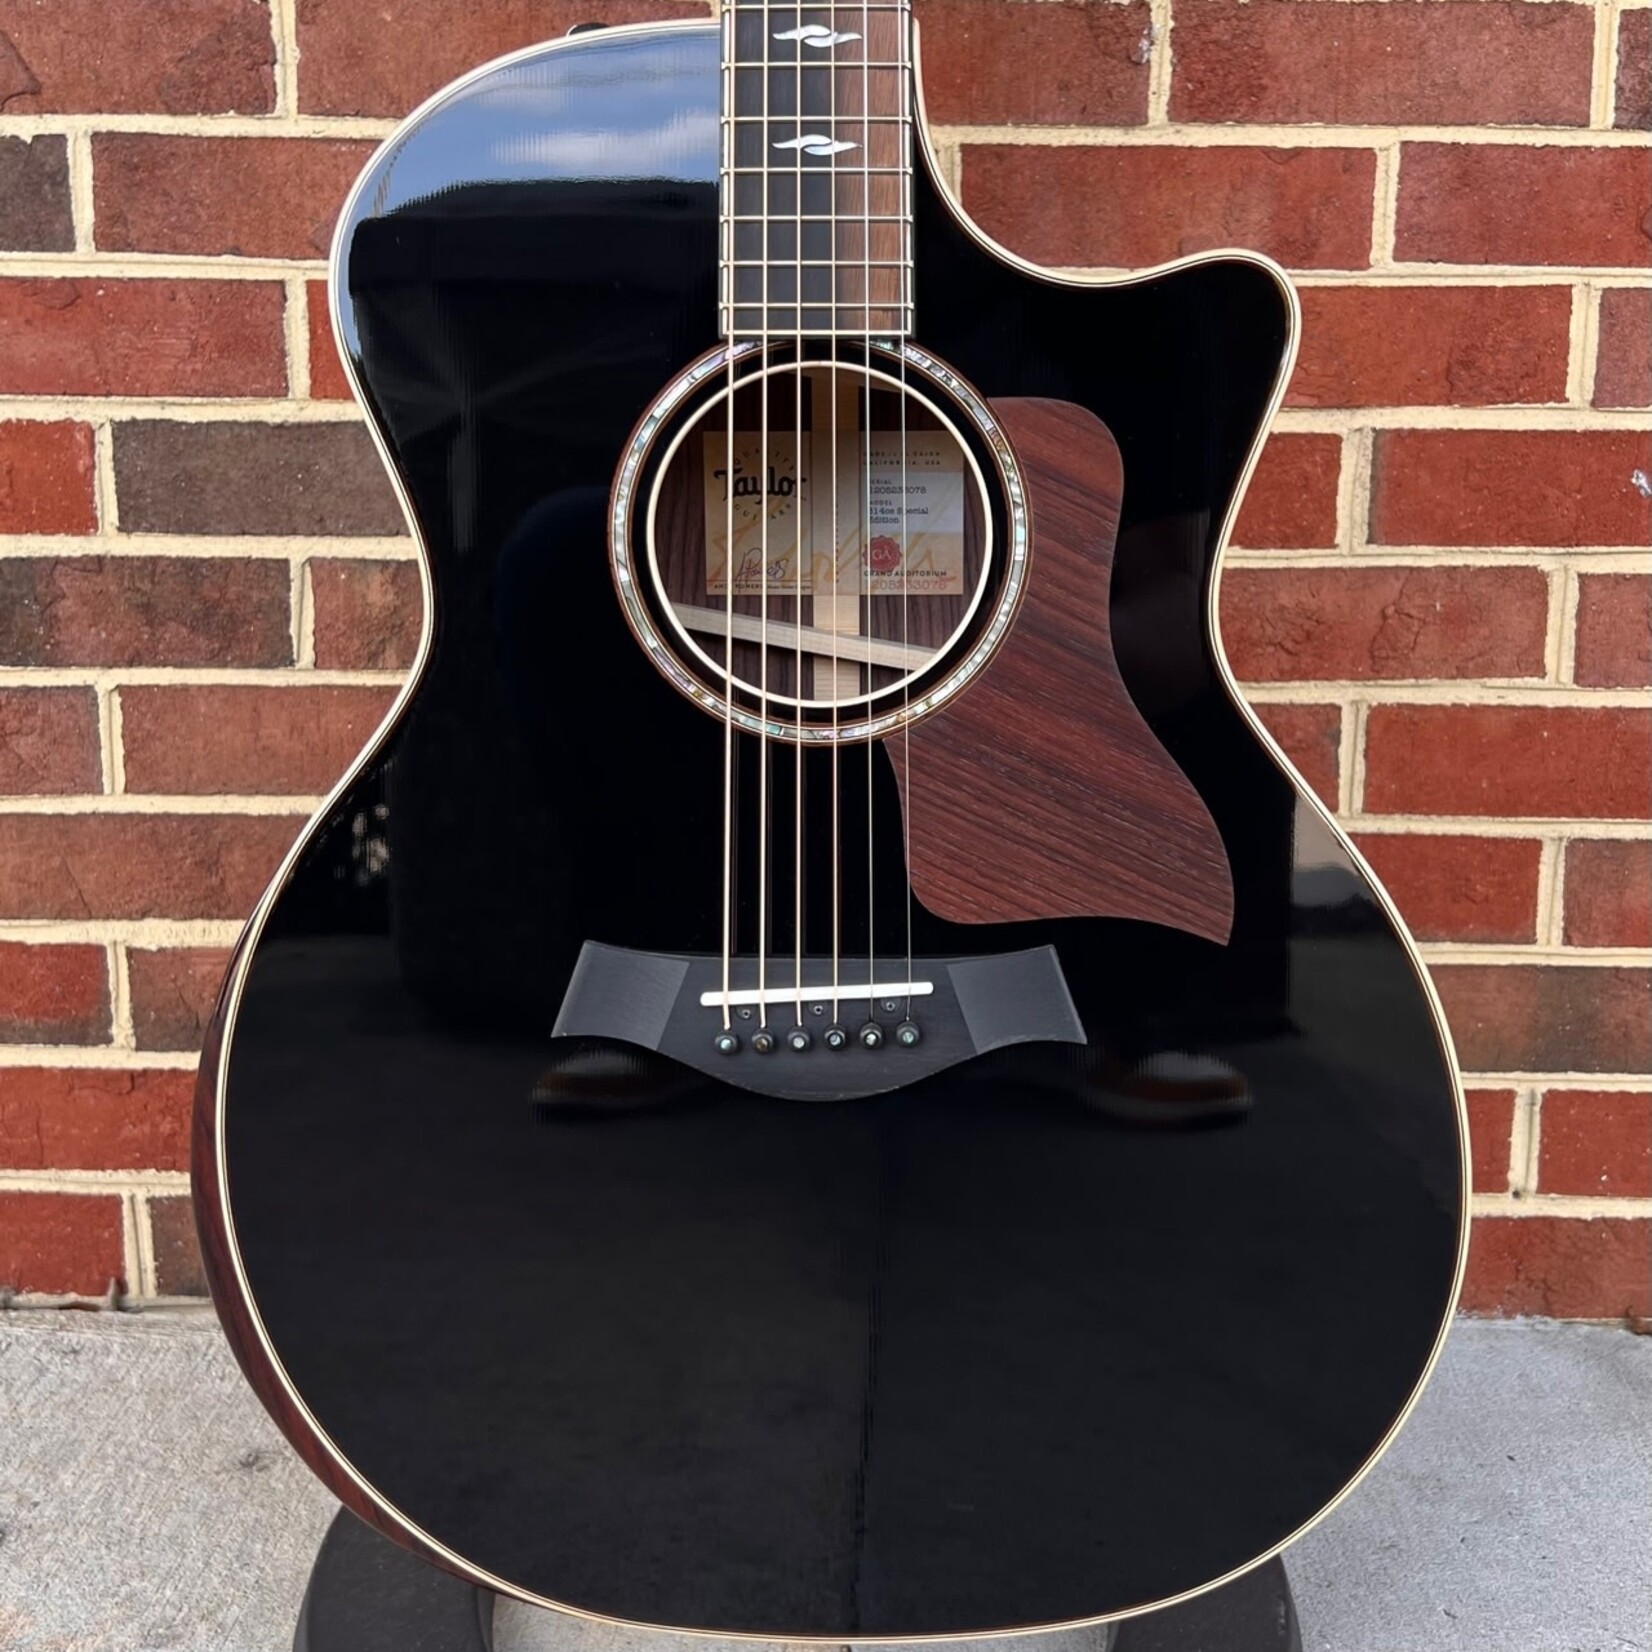 Taylor Taylor 814ce Special Edition, Blacktop, Solid Sitka Spruce Top, Solid Rosewood Back & Sides, ES2 Electronics, Hardshell Case